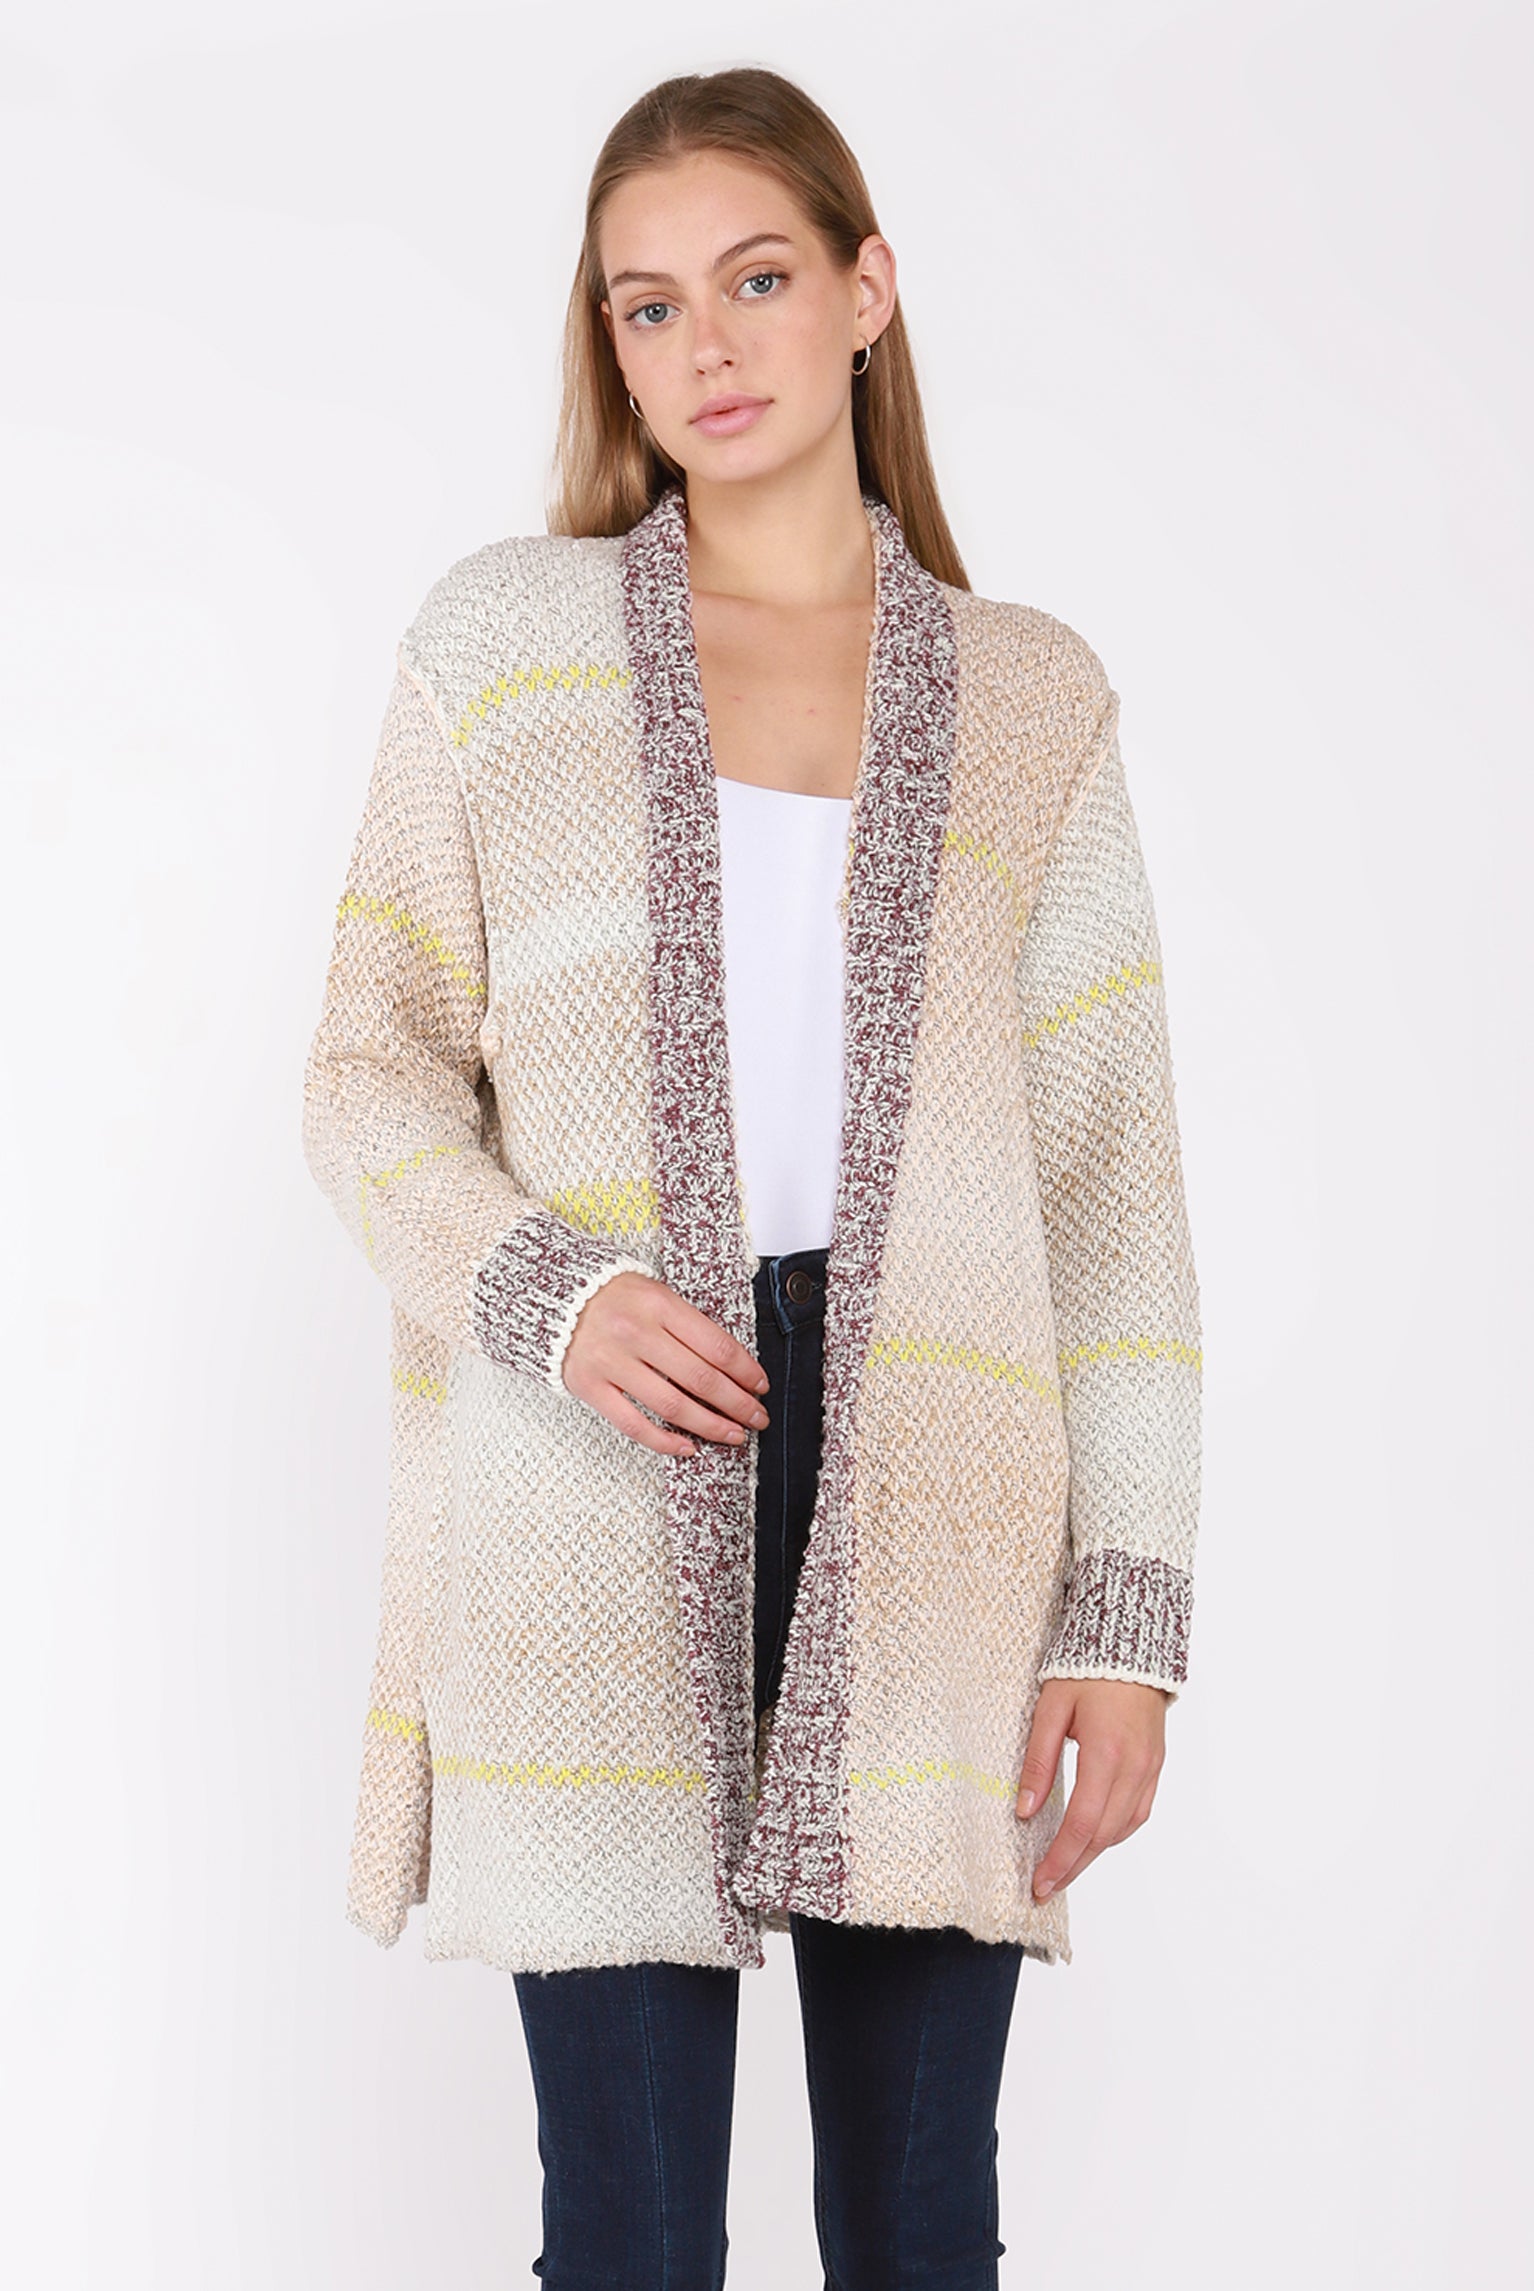 Patchwork Multi Colored Cardigan-Cardigans-Vixen Collection, Day Spa and Women's Boutique Located in Seattle, Washington